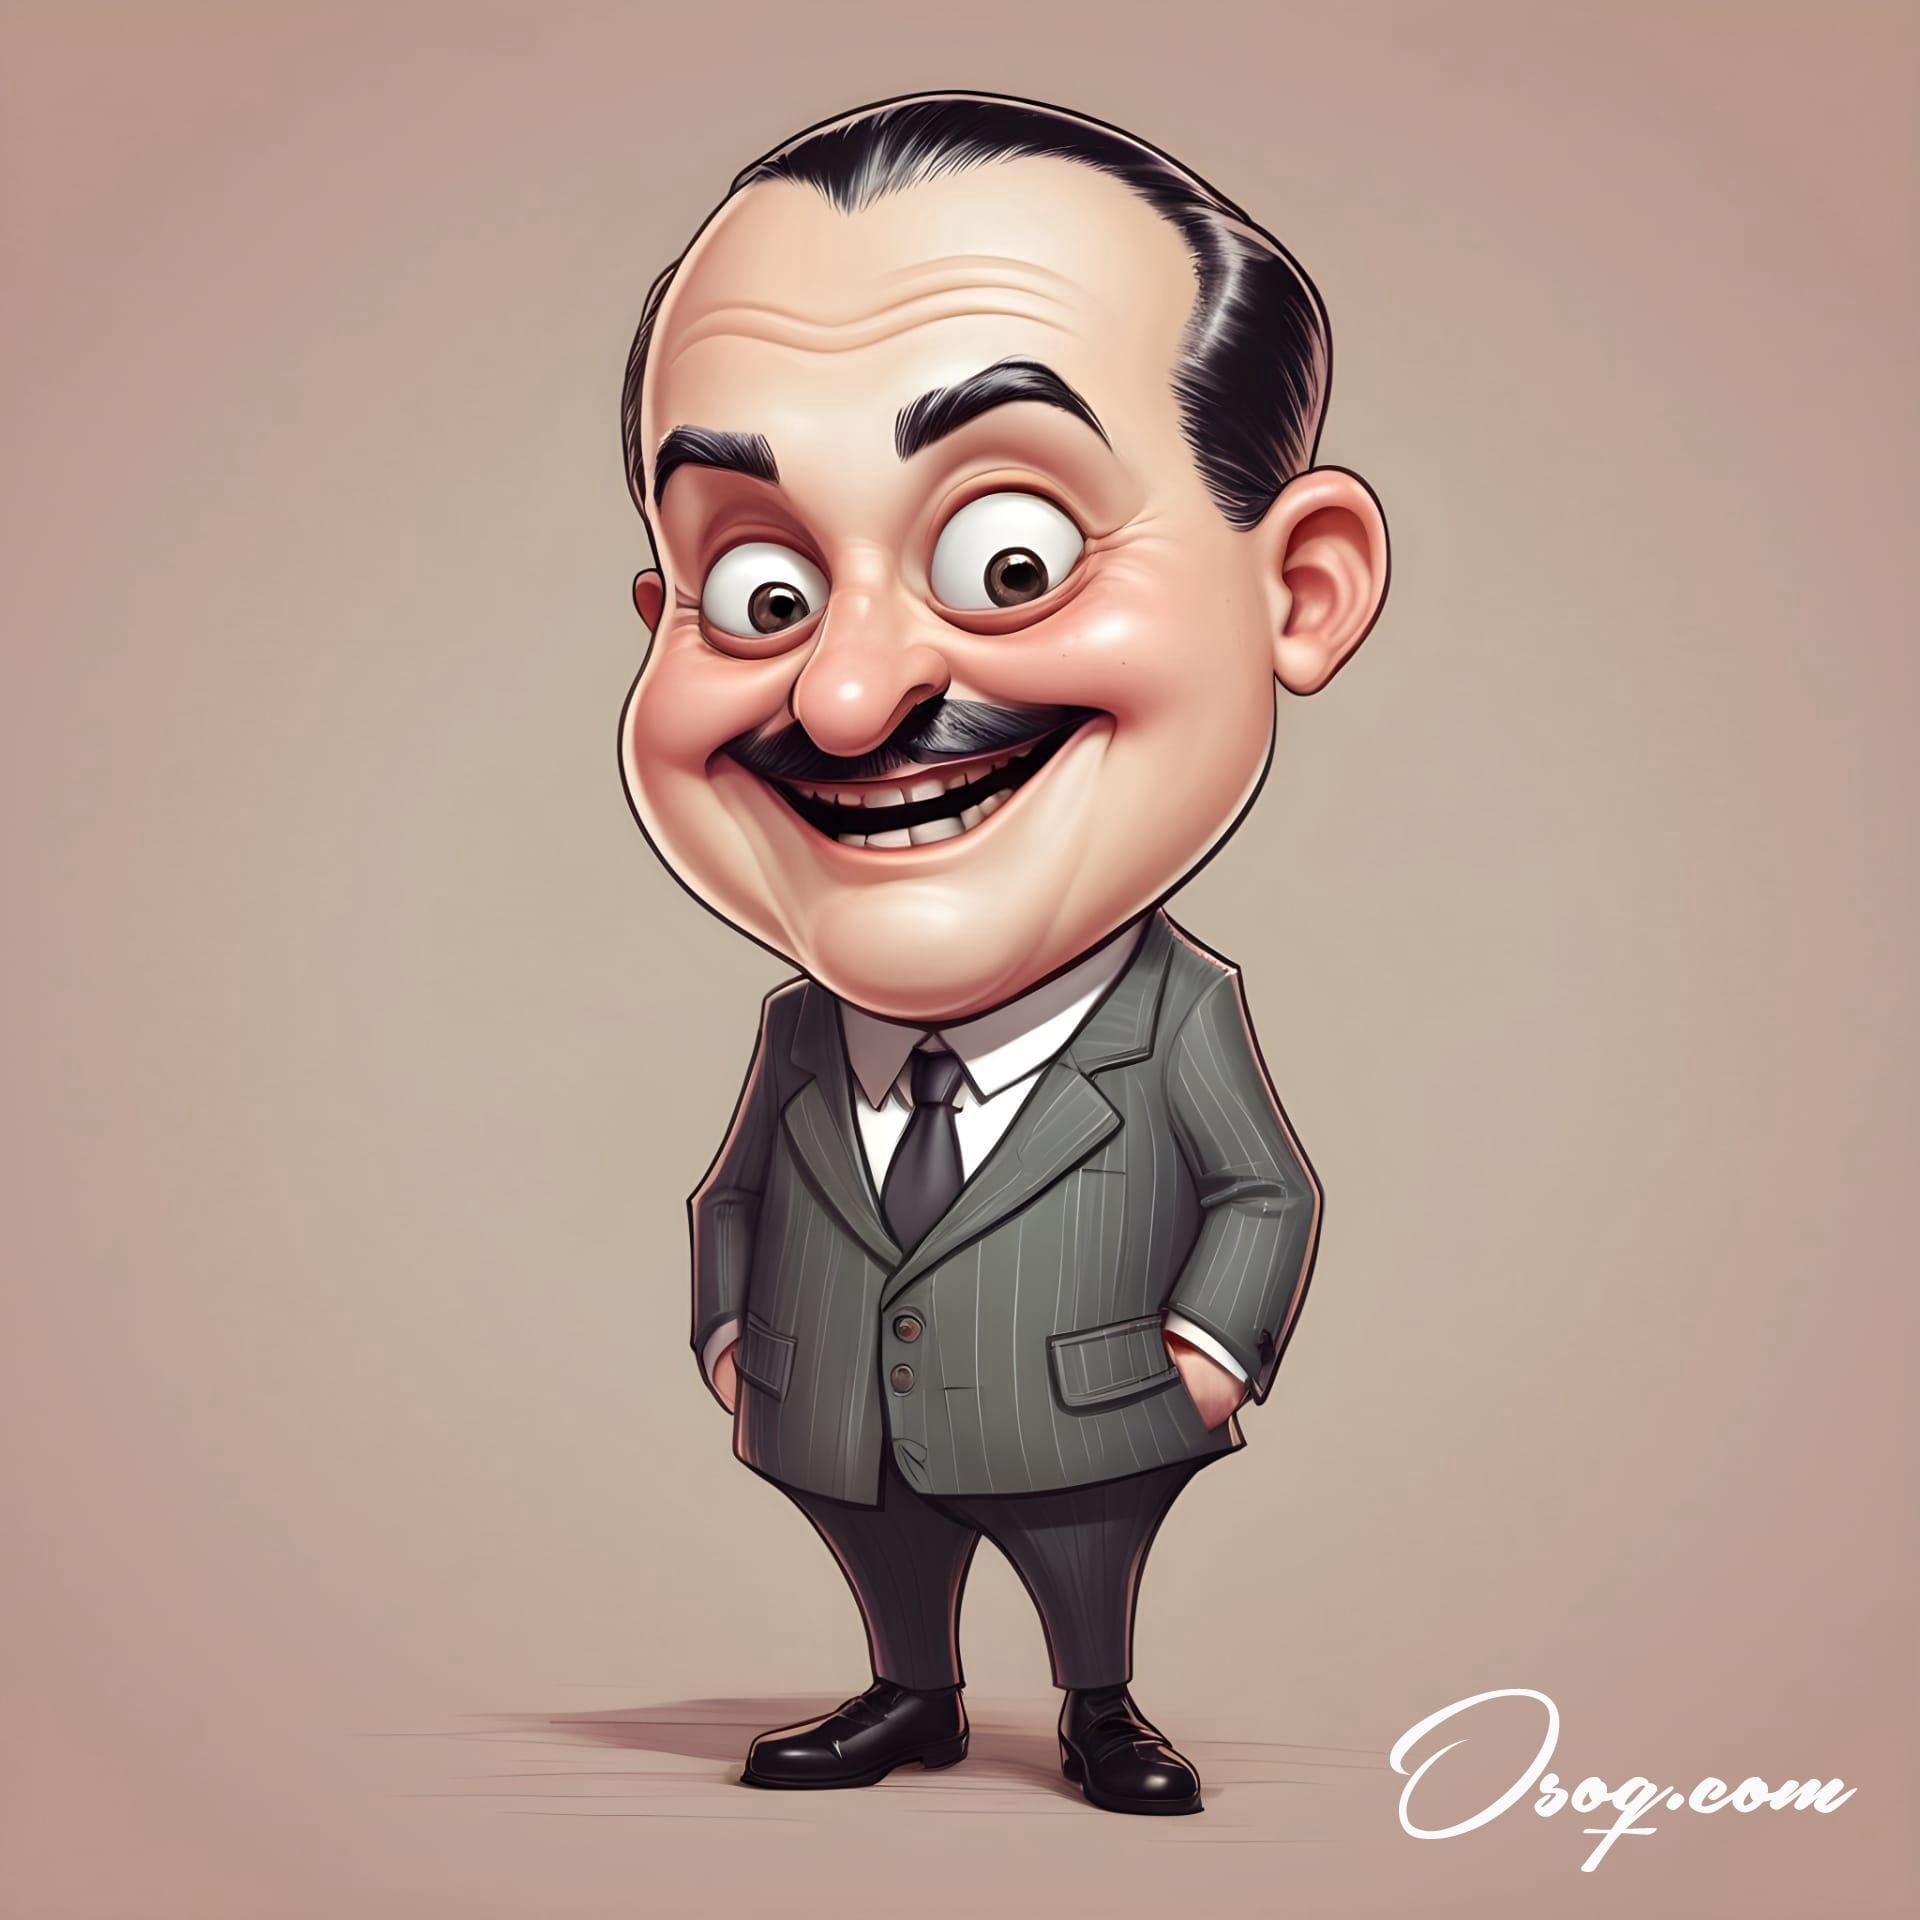 Addams family caricature 06